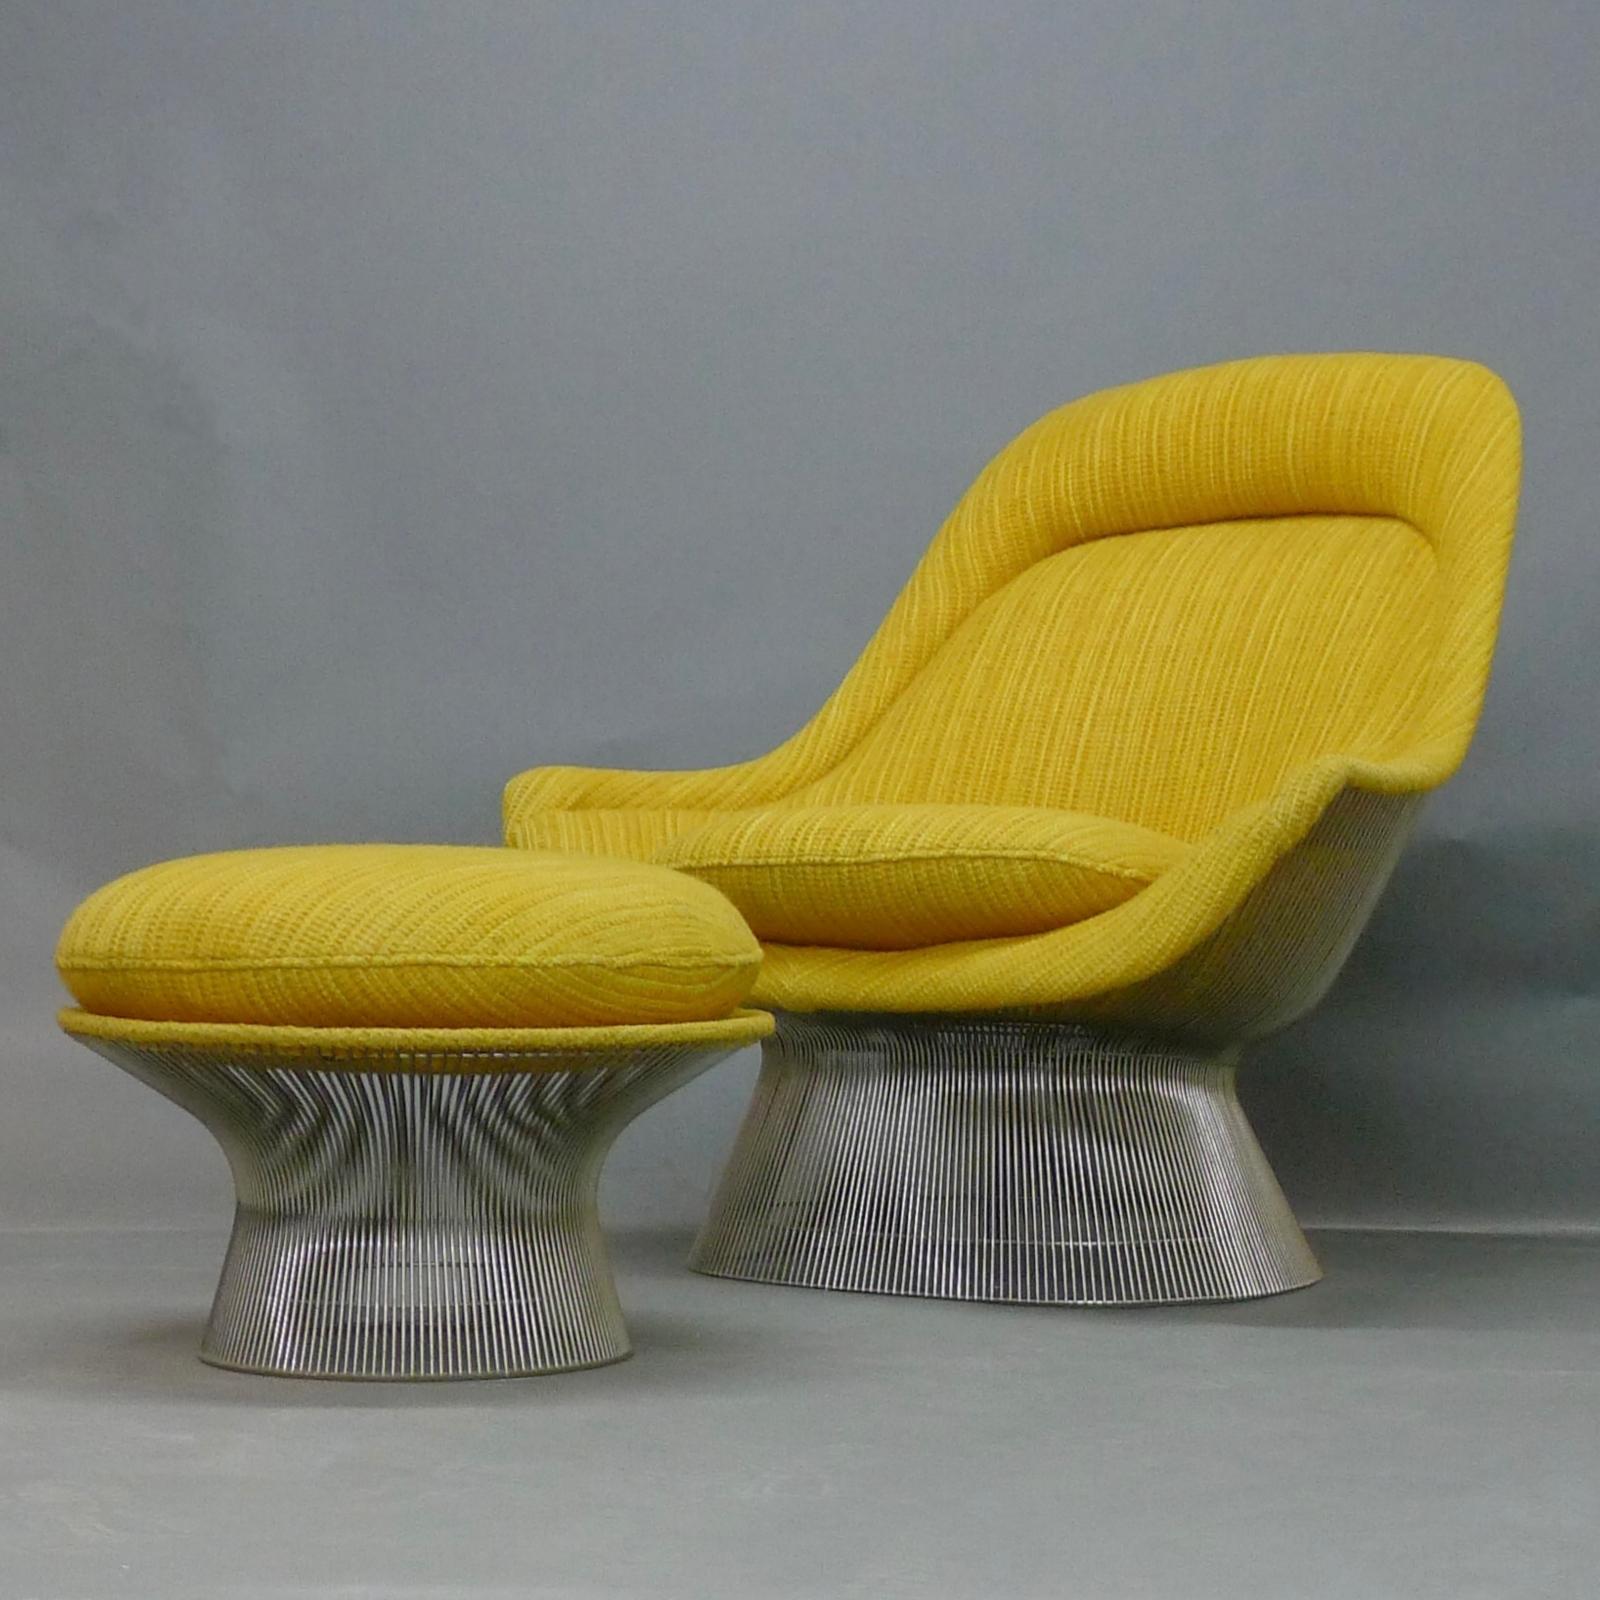 Warren Platner Easy Lounge Chair and matching Ottoman, designed 1966 and manufactured by Knoll International, this set dated 1972.

This iconic chair is made of moulded fibreglass covered in the original vibrant yellow tweed fabric upholstery, and